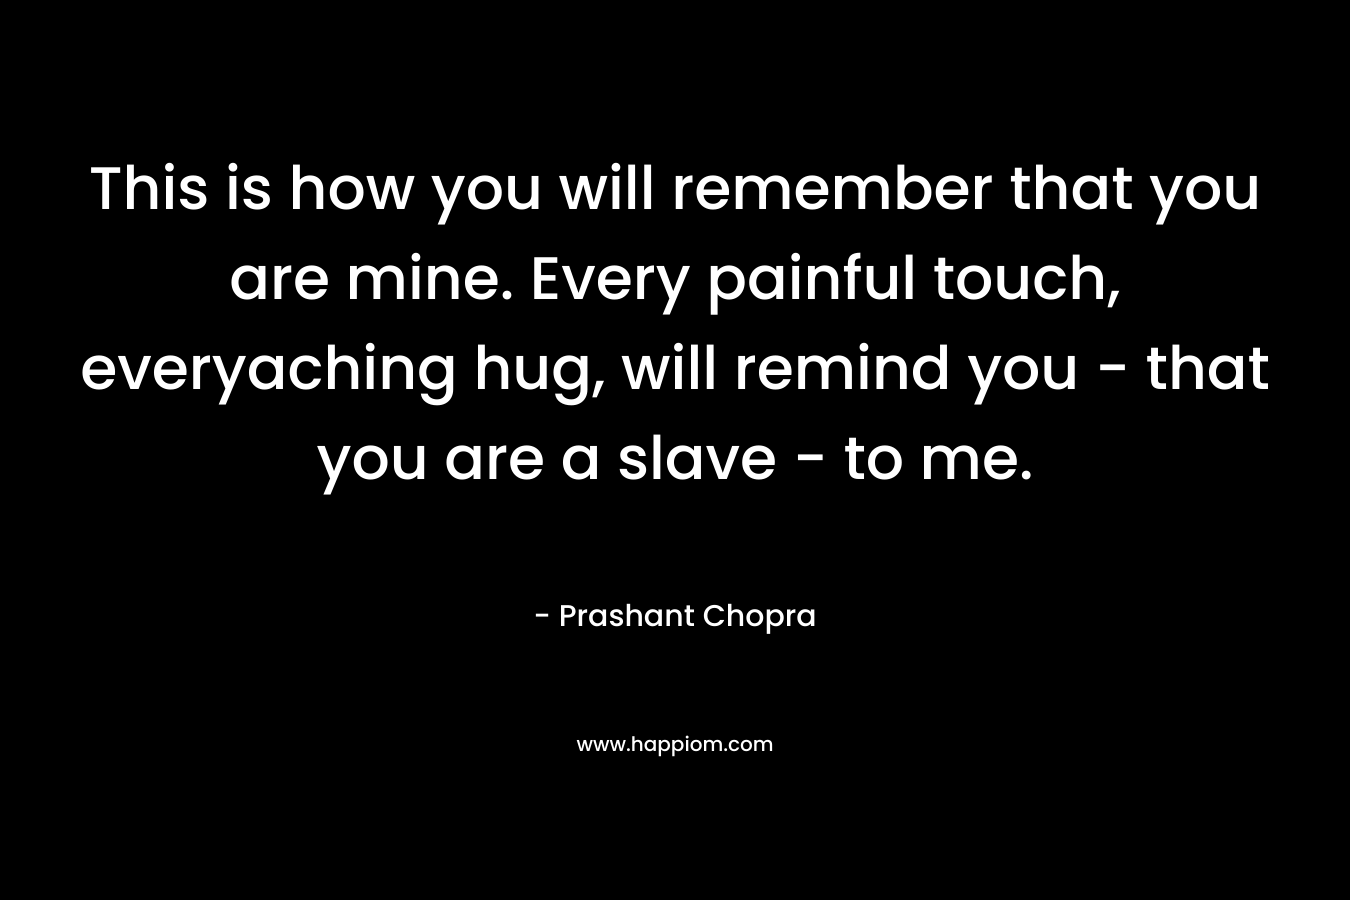 This is how you will remember that you are mine. Every painful touch, everyaching hug, will remind you – that you are a slave – to me. – Prashant Chopra